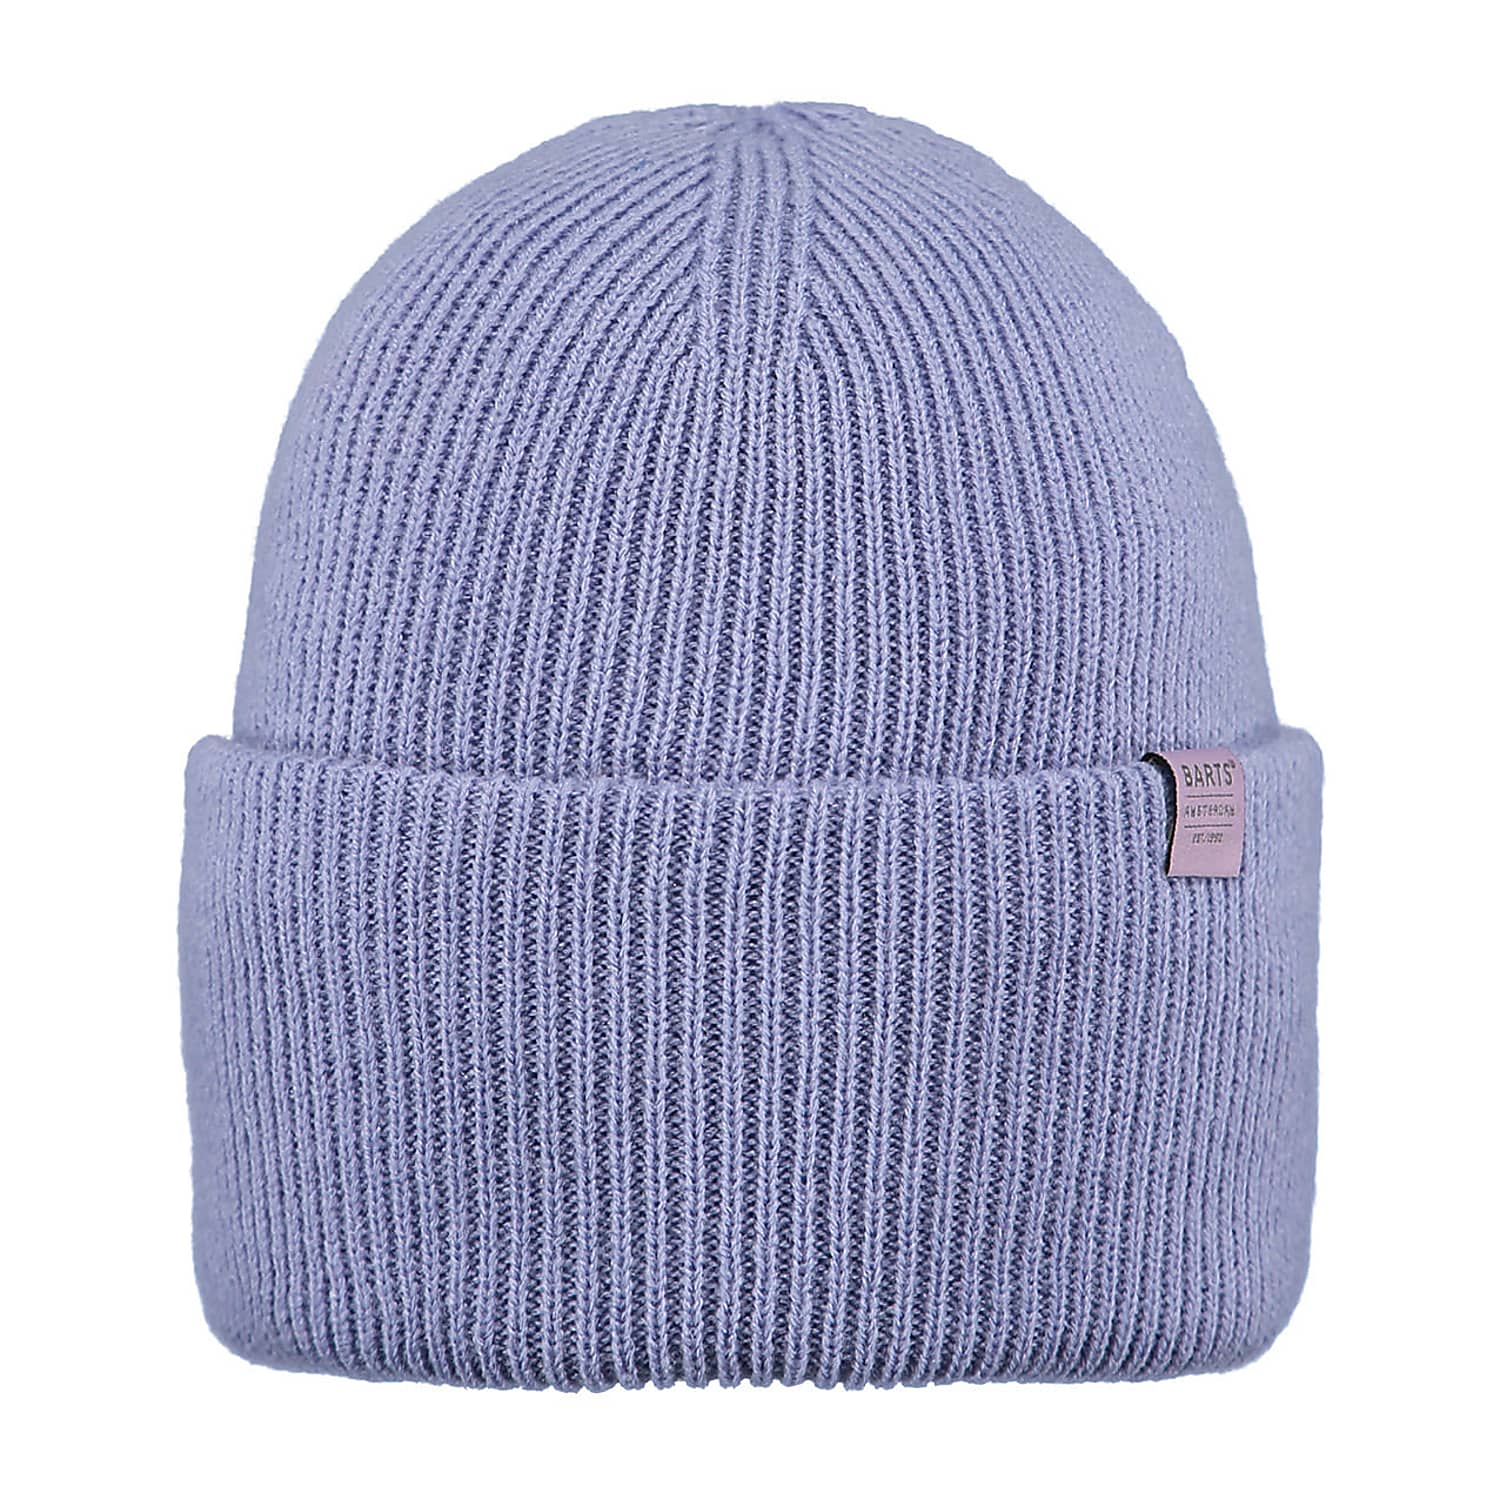 Fast HAVENO and II - shipping BEANIE, Berry Barts cheap